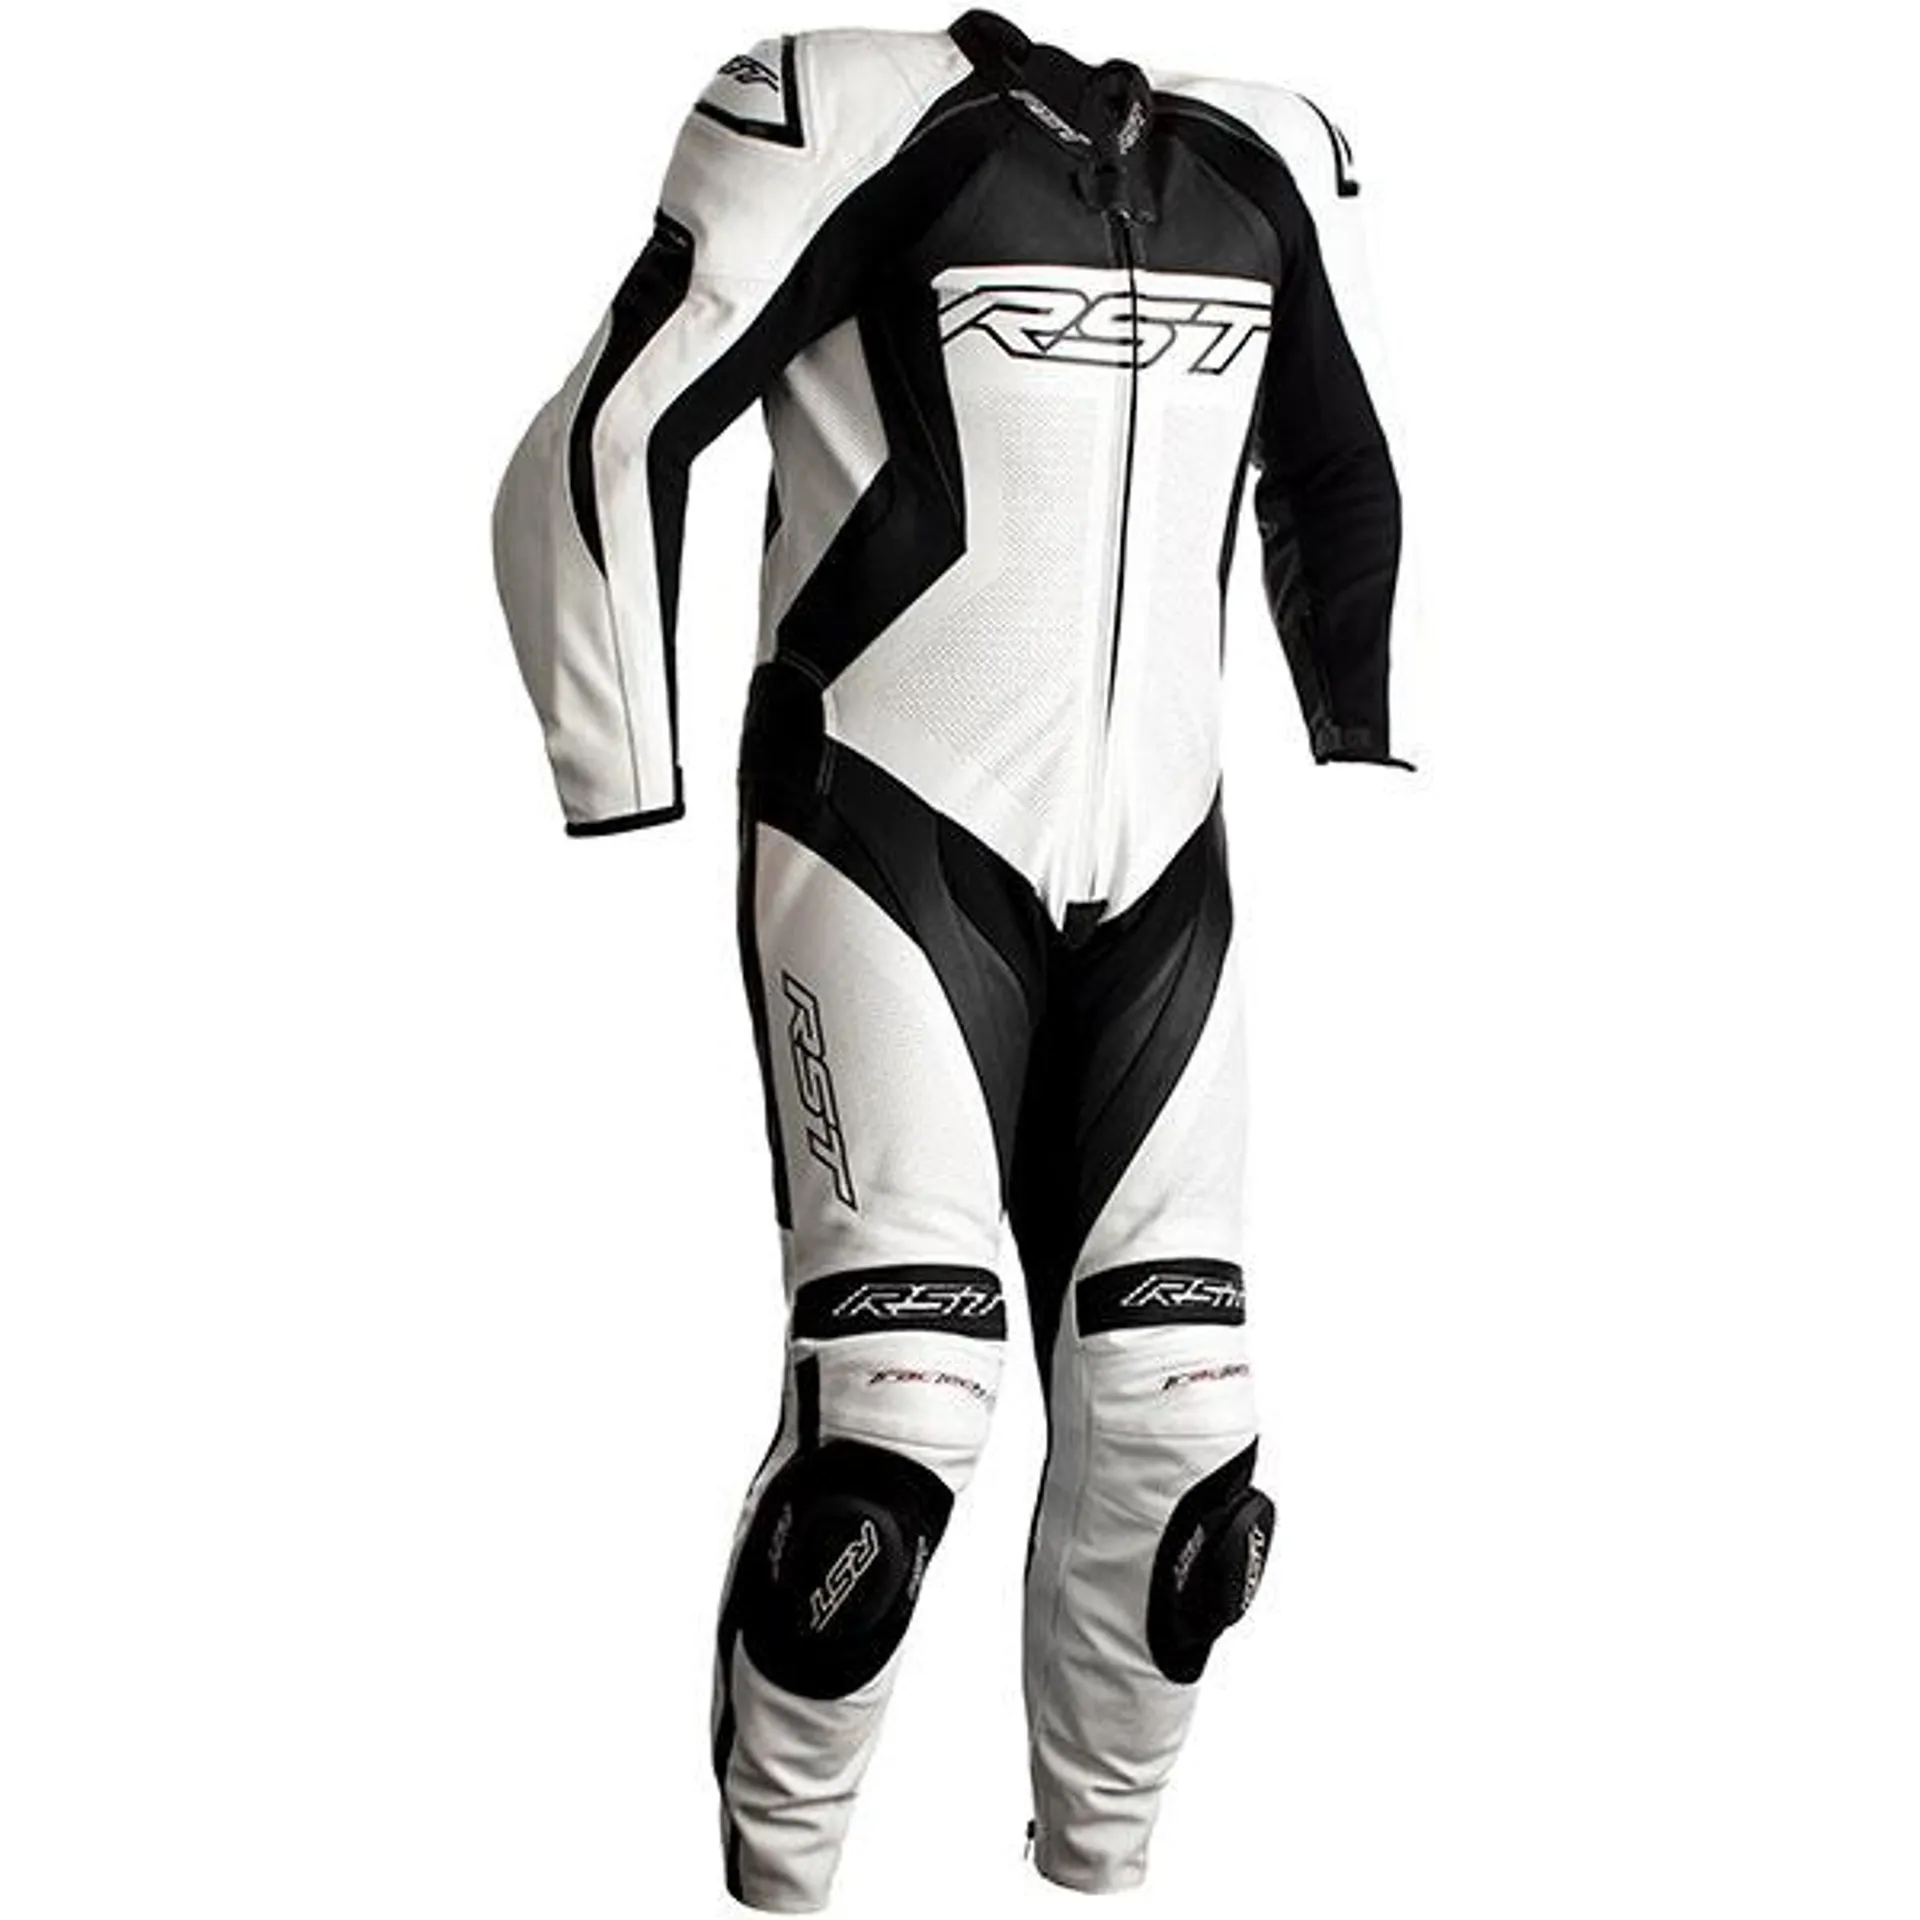 RST Tractech Evo 4 CE One Piece Leather Suit - White / Black